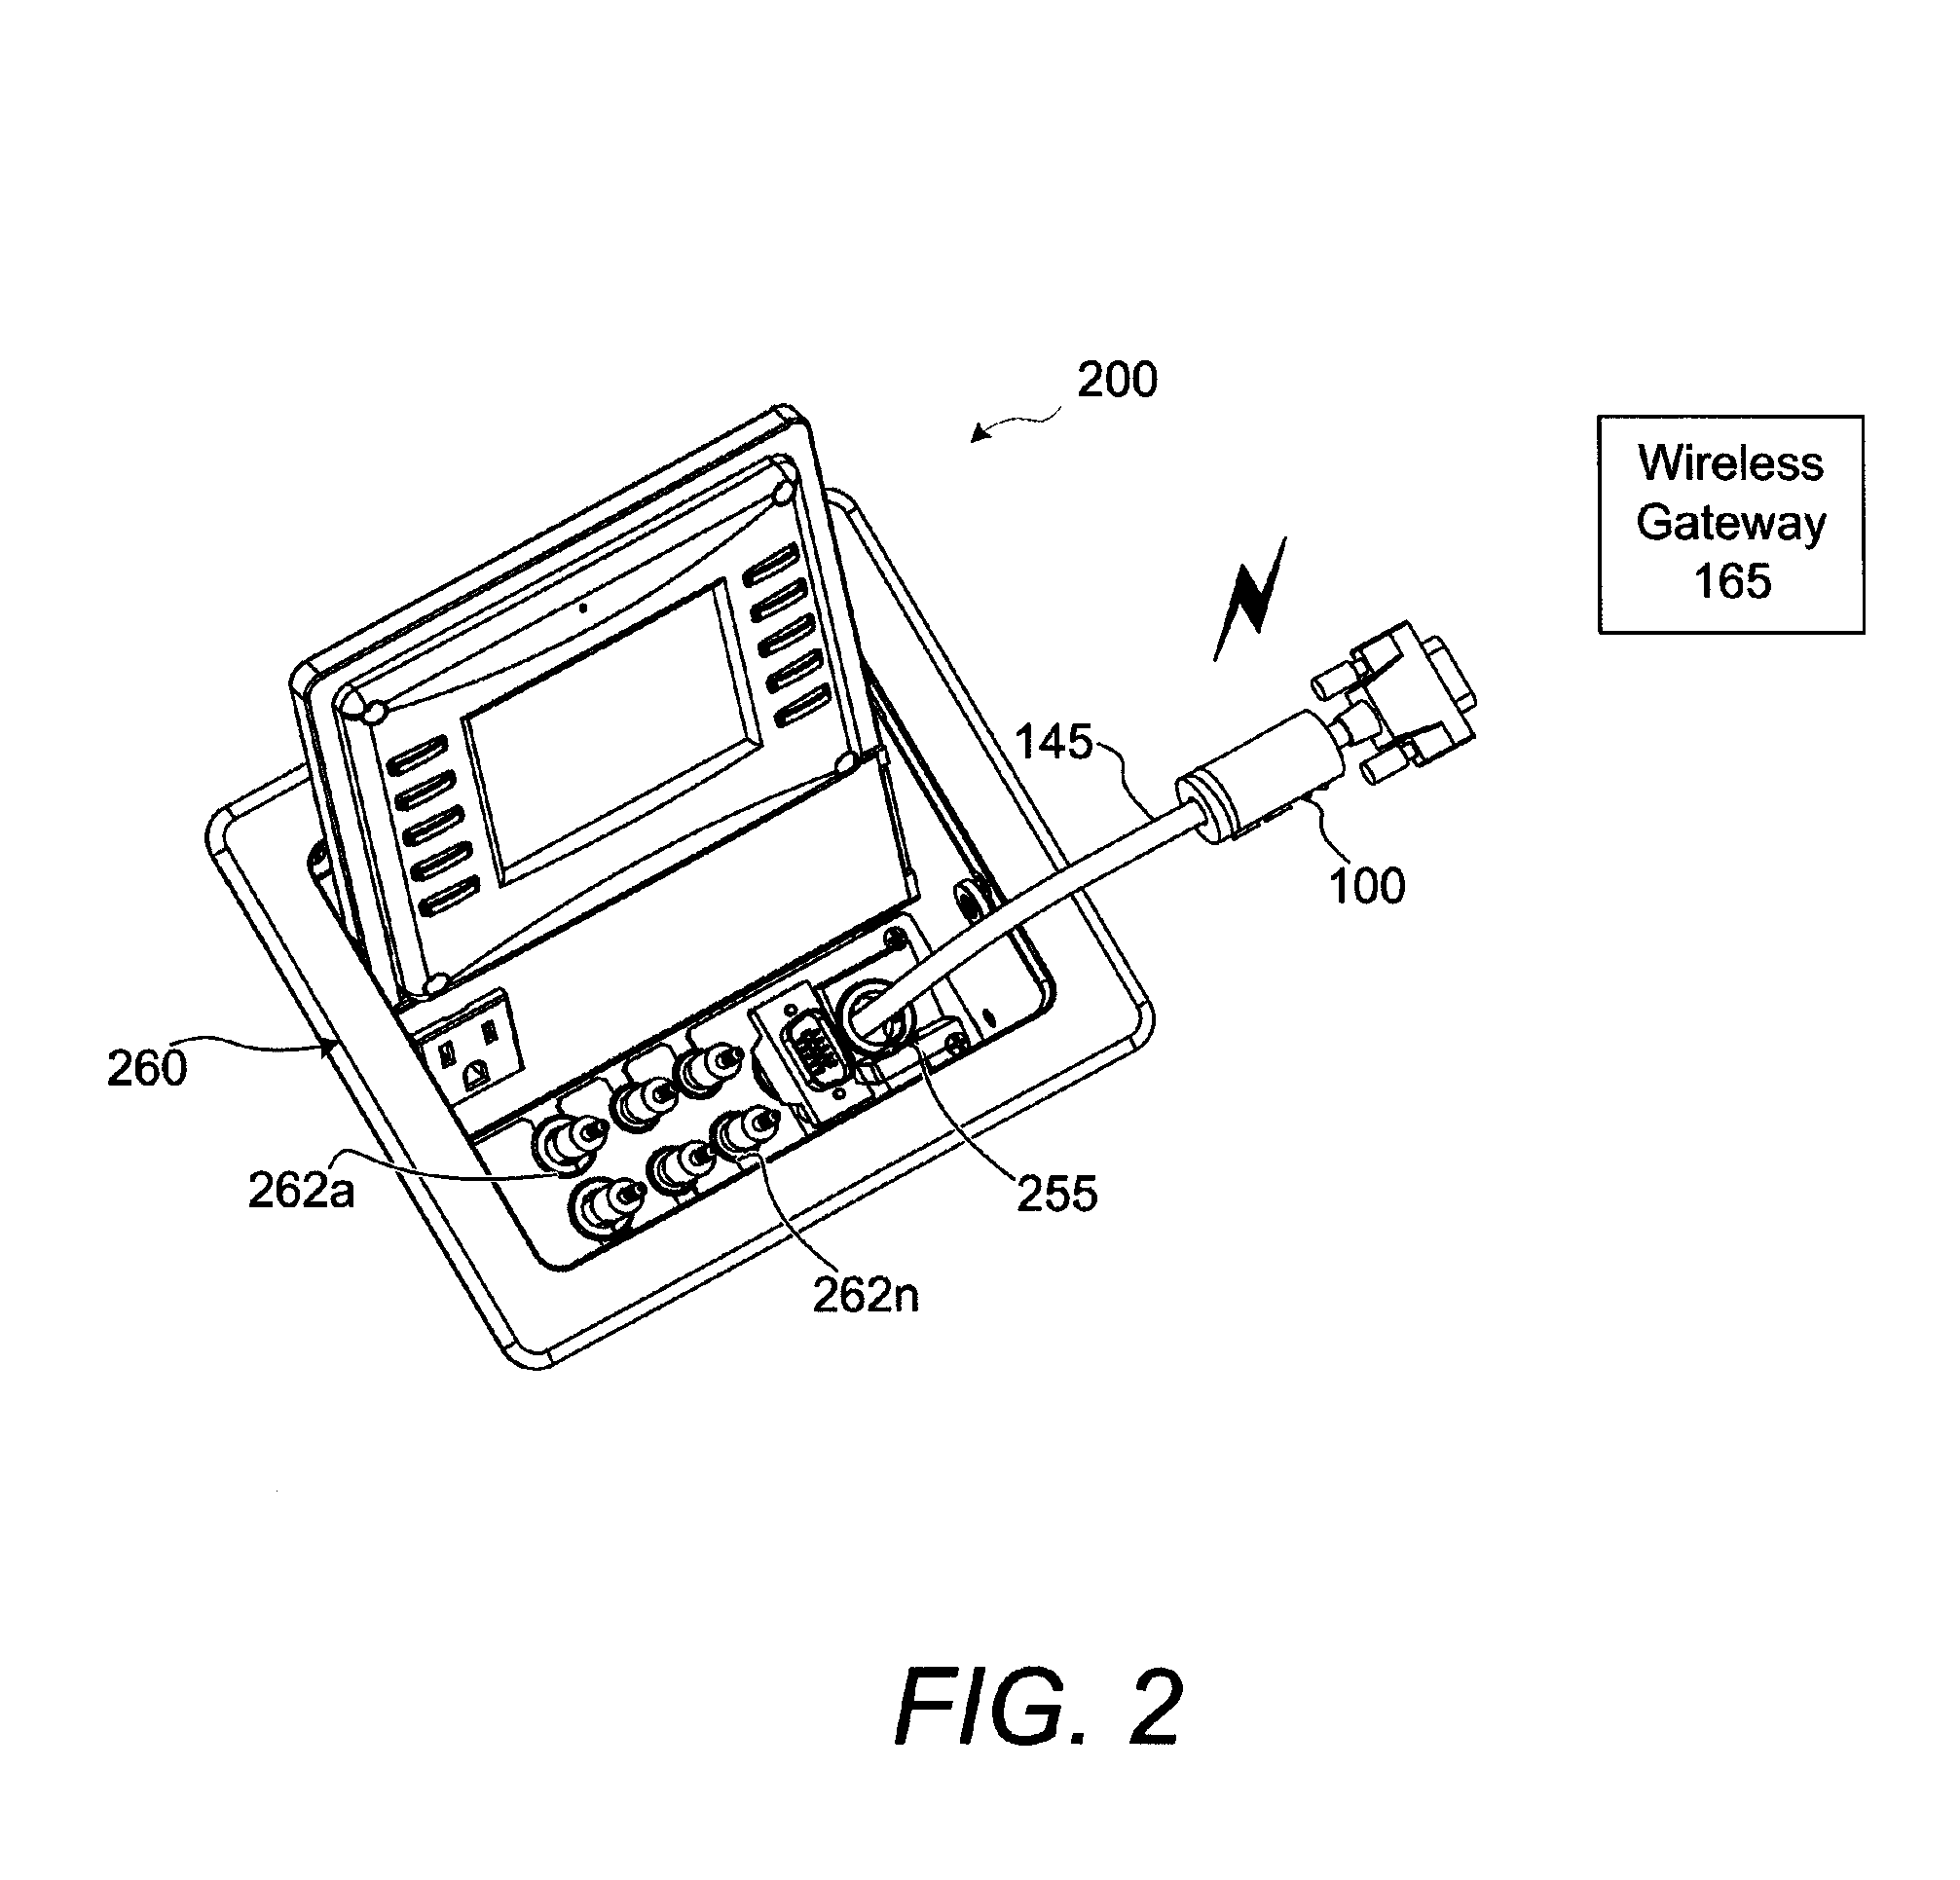 Cable clamp-on device including a user interface